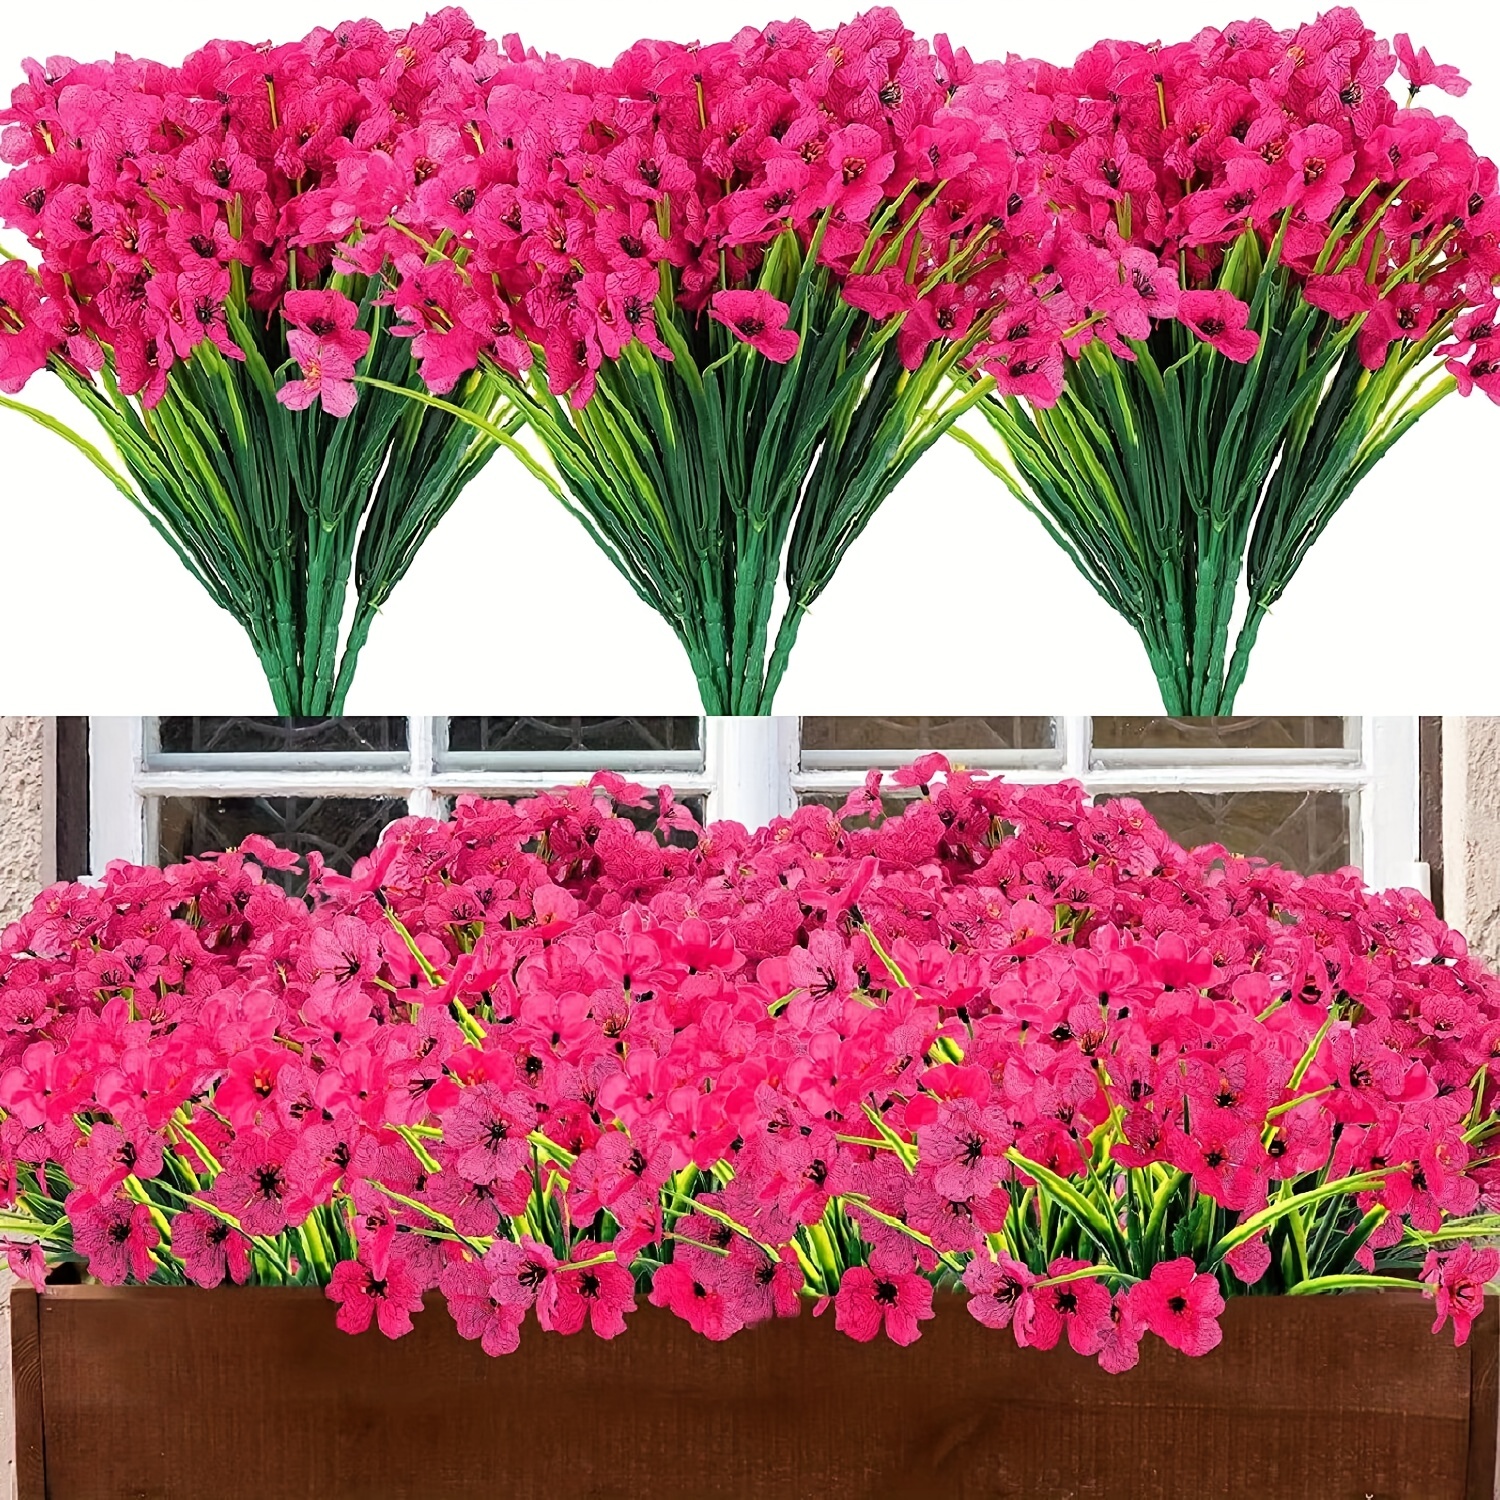 

12pcs, Artificial Outdoor Flowers Violet Uv Resistant Fake Plastic Faux Greenery Plants For Wedding Home Garden Porch Decoration (red)